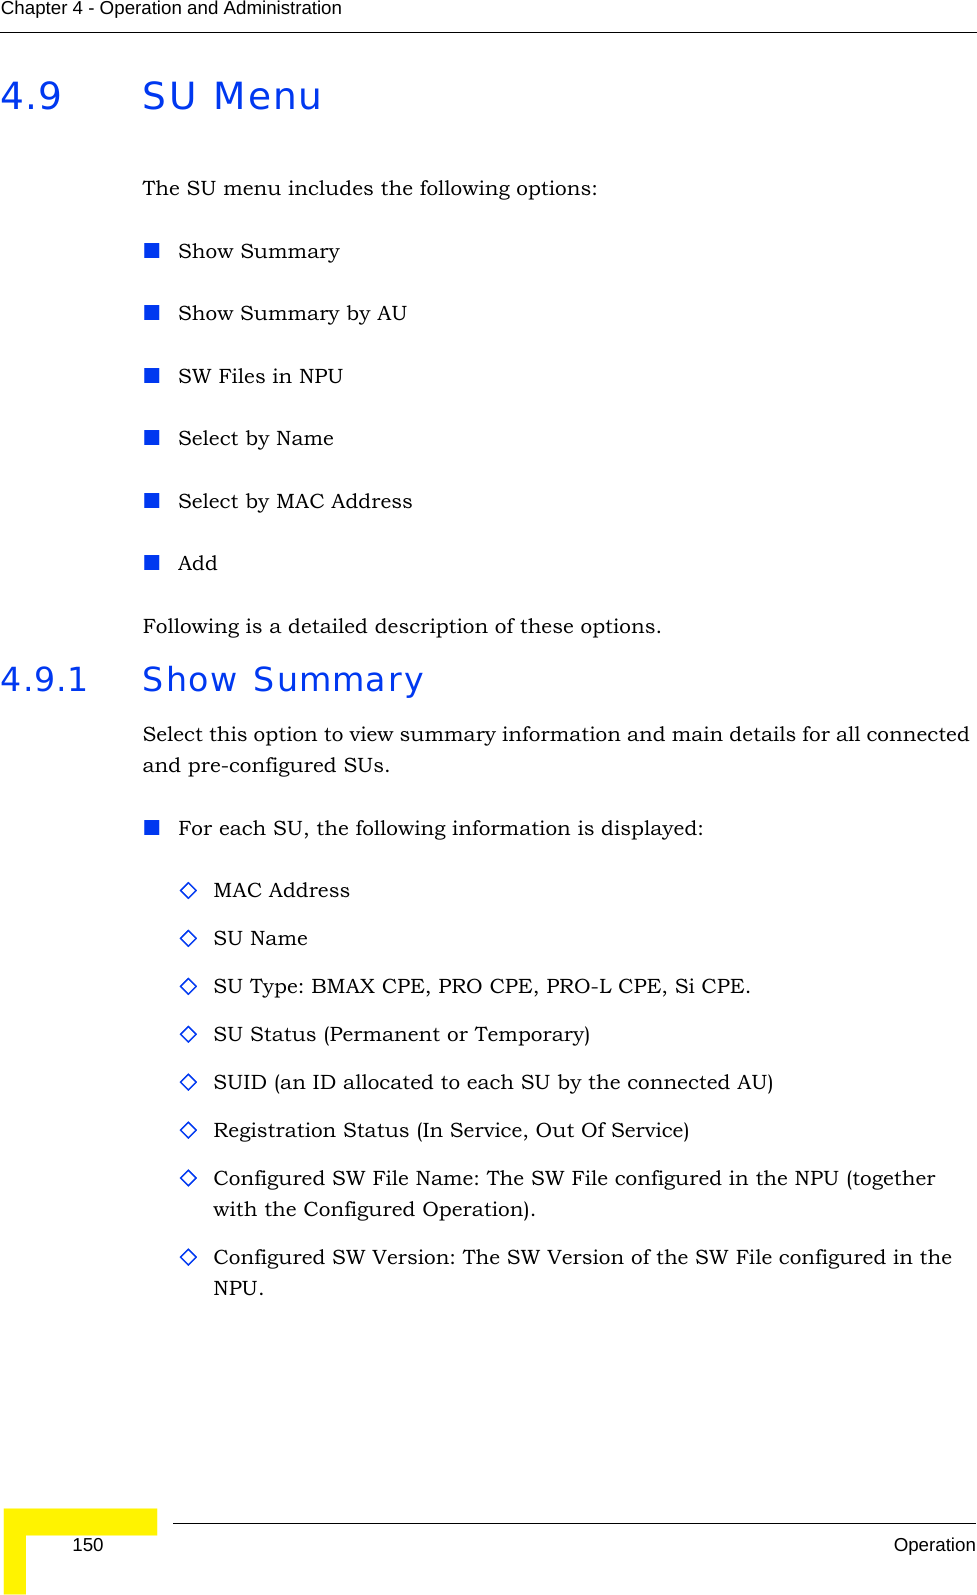  150 OperationChapter 4 - Operation and Administration4.9 SU MenuThe SU menu includes the following options:Show SummaryShow Summary by AUSW Files in NPUSelect by NameSelect by MAC AddressAddFollowing is a detailed description of these options.4.9.1 Show SummarySelect this option to view summary information and main details for all connected and pre-configured SUs. For each SU, the following information is displayed:MAC AddressSU NameSU Type: BMAX CPE, PRO CPE, PRO-L CPE, Si CPE. SU Status (Permanent or Temporary)SUID (an ID allocated to each SU by the connected AU)Registration Status (In Service, Out Of Service)Configured SW File Name: The SW File configured in the NPU (together with the Configured Operation). Configured SW Version: The SW Version of the SW File configured in the NPU.